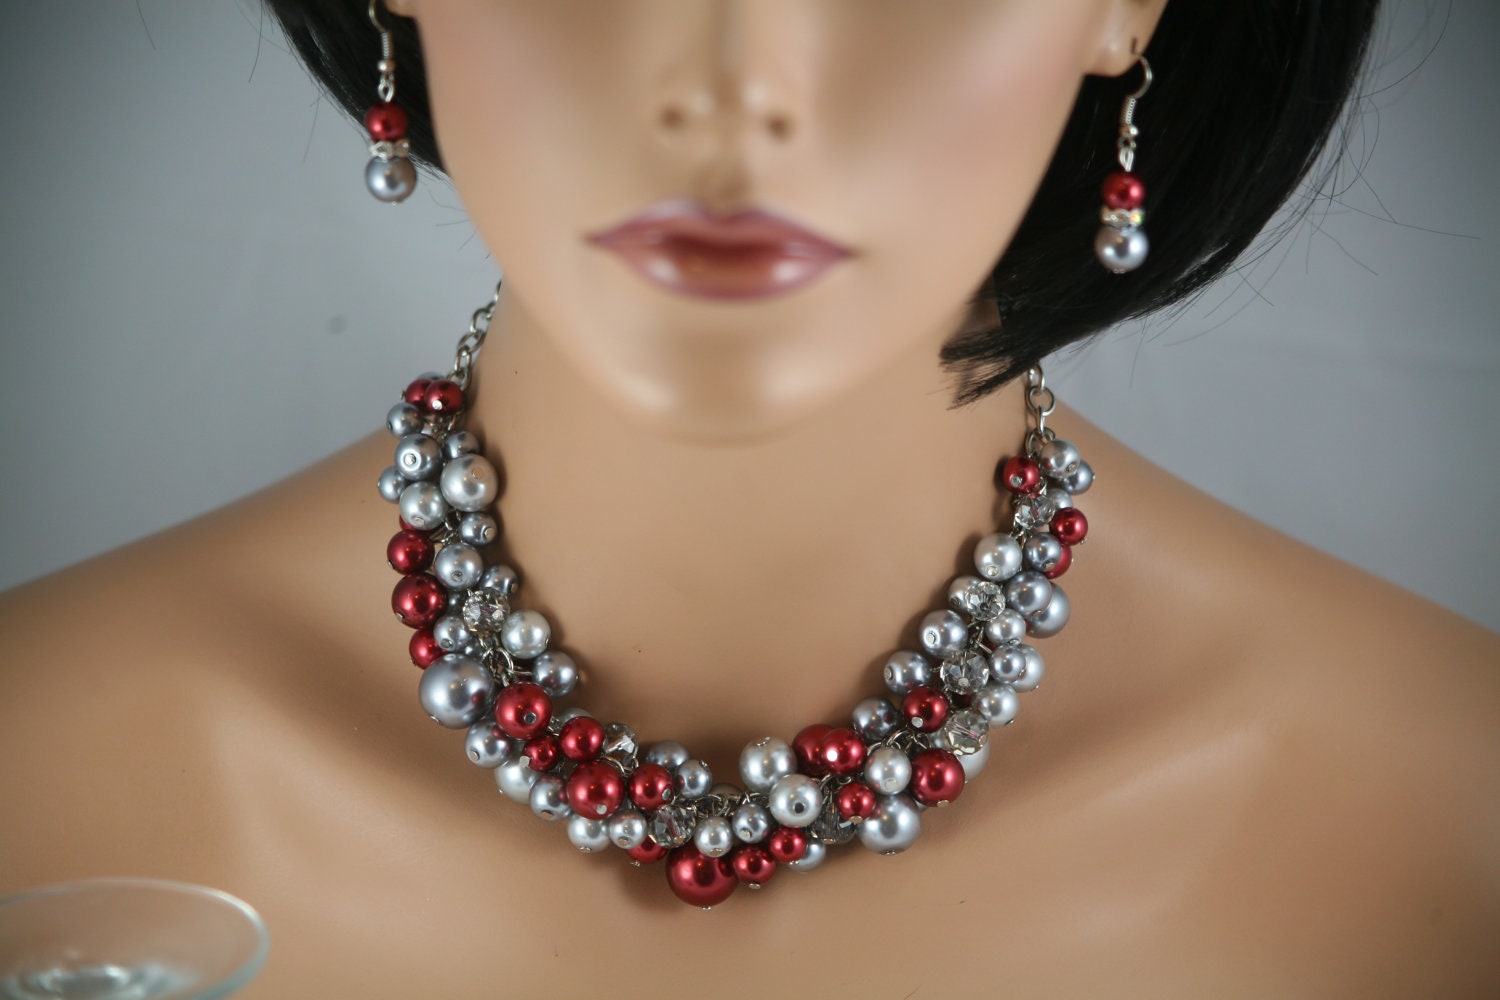 Bridesmaids necklace in red and gray pearls -wedding jewelry, bridesmaids necklace, statement necklace